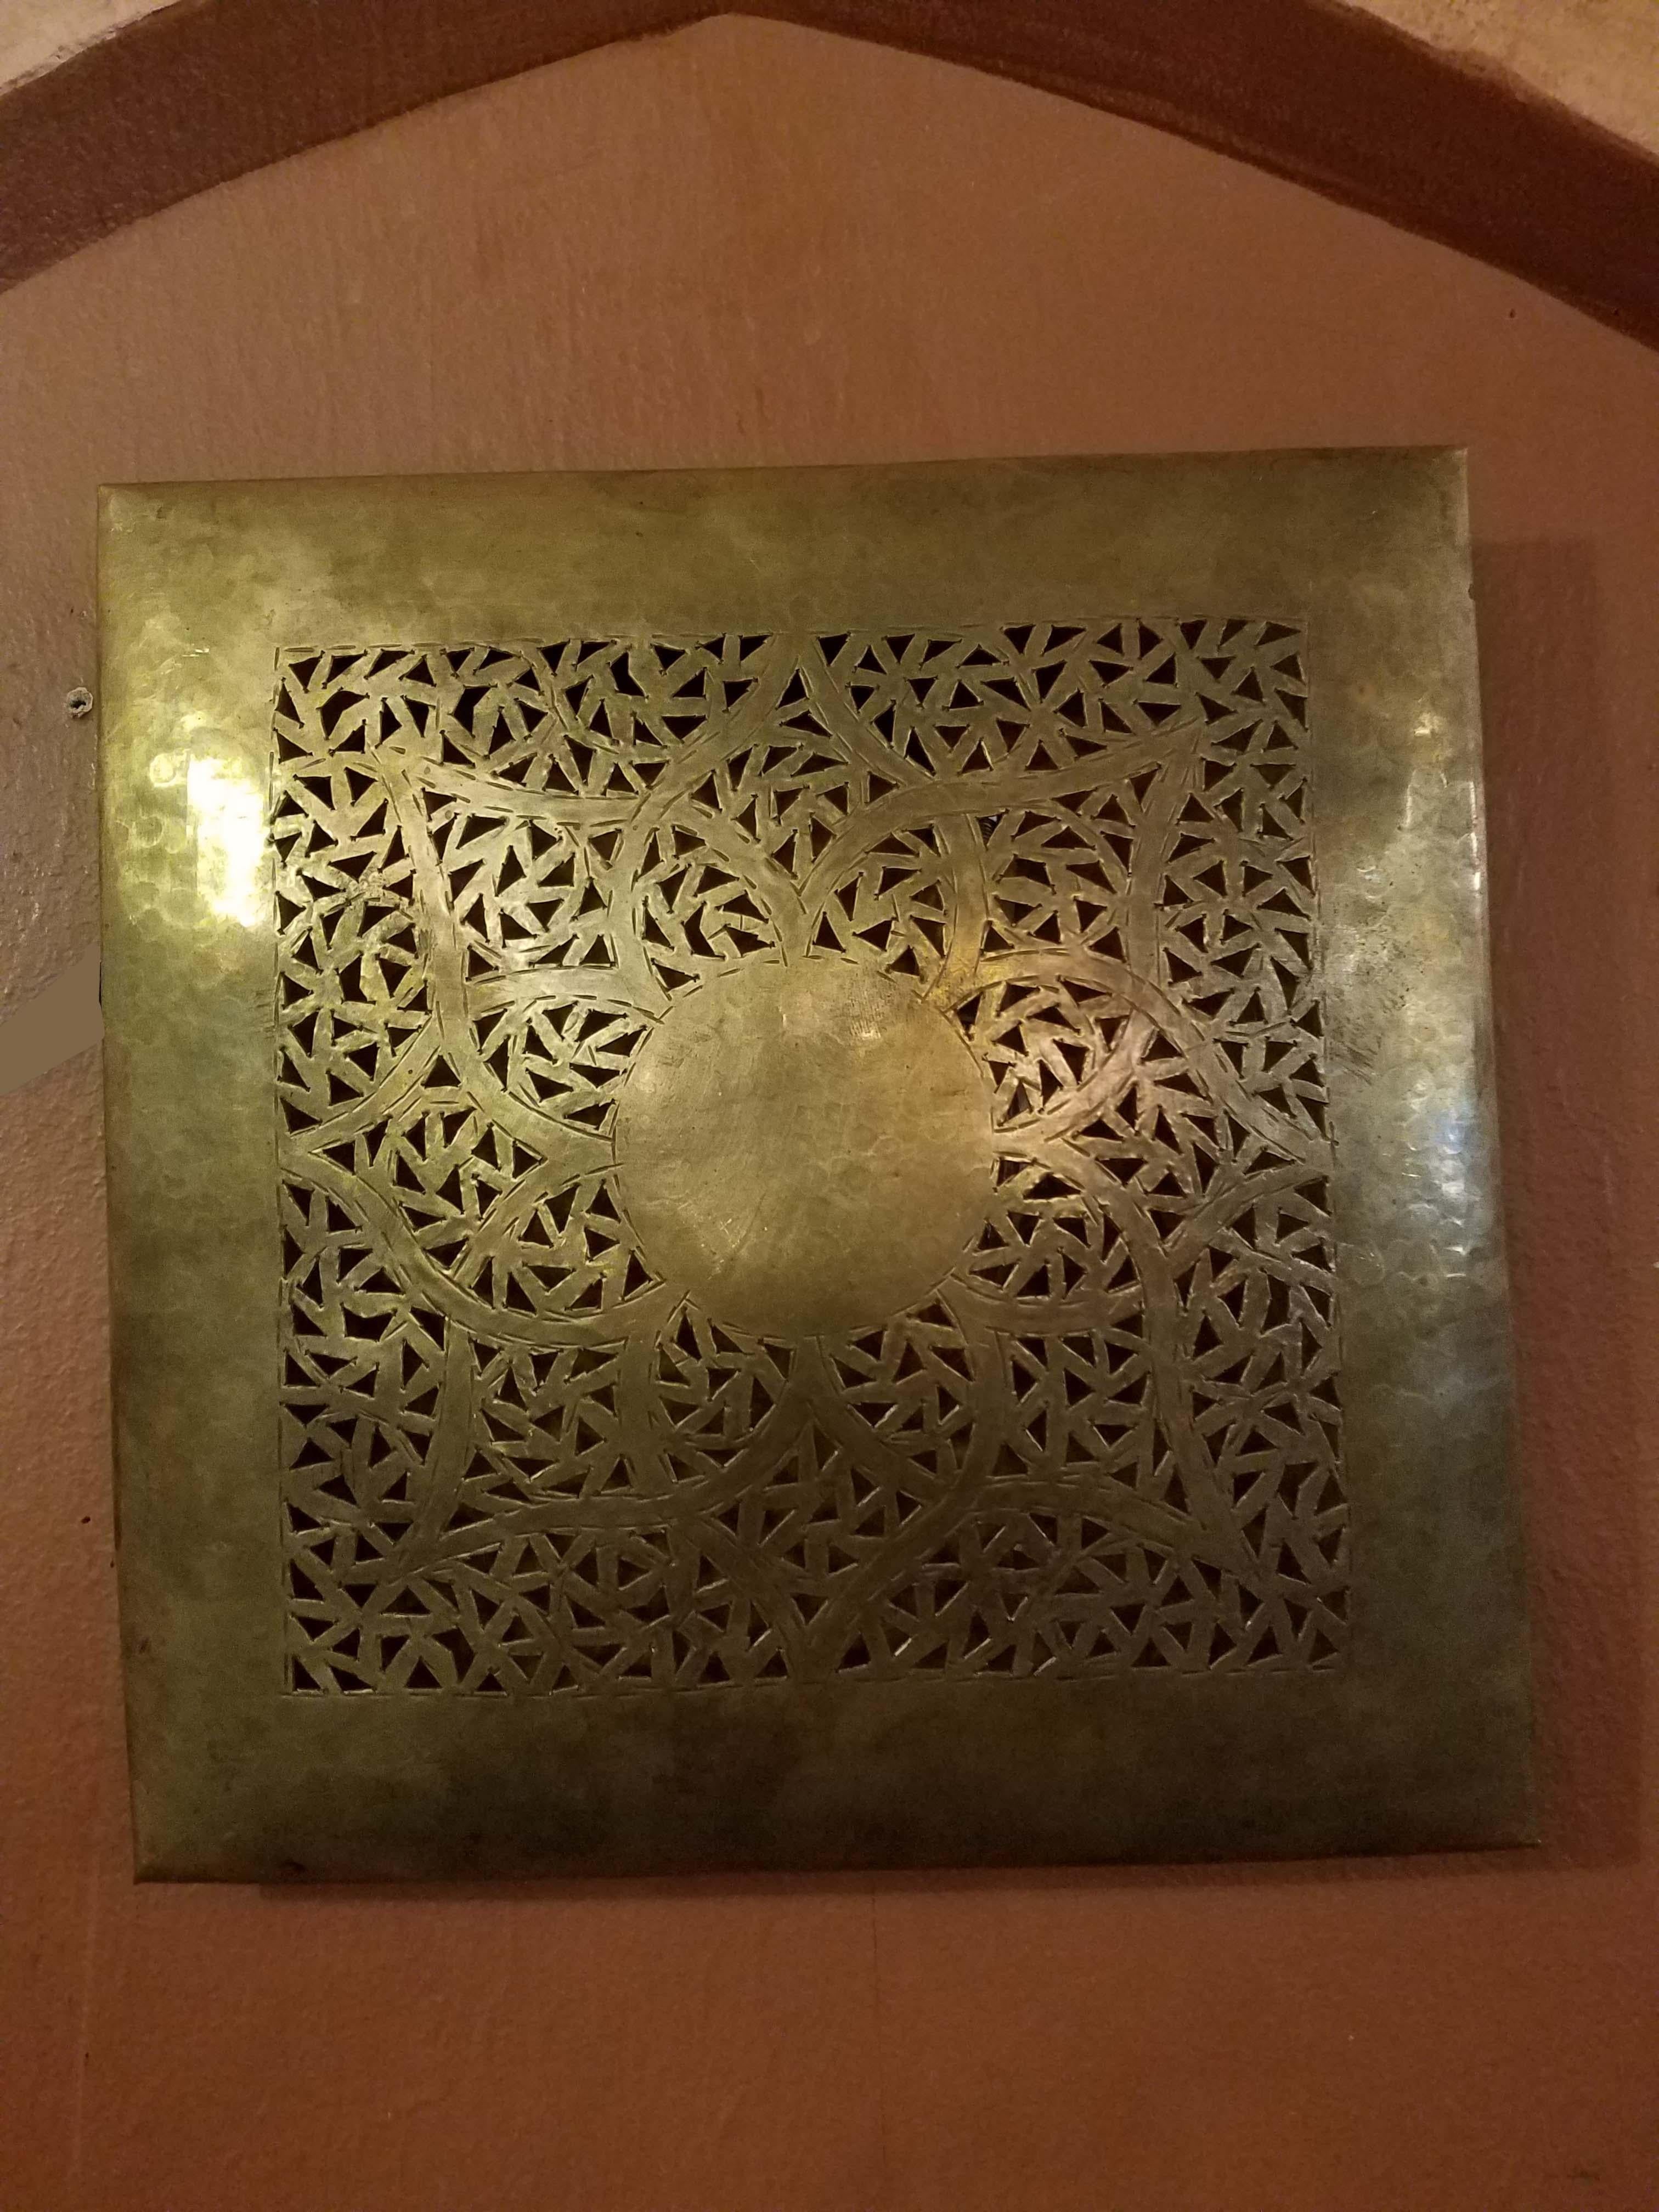 Intricate Moroccan Copper Wall Sconce, Small Square In Excellent Condition For Sale In Orlando, FL